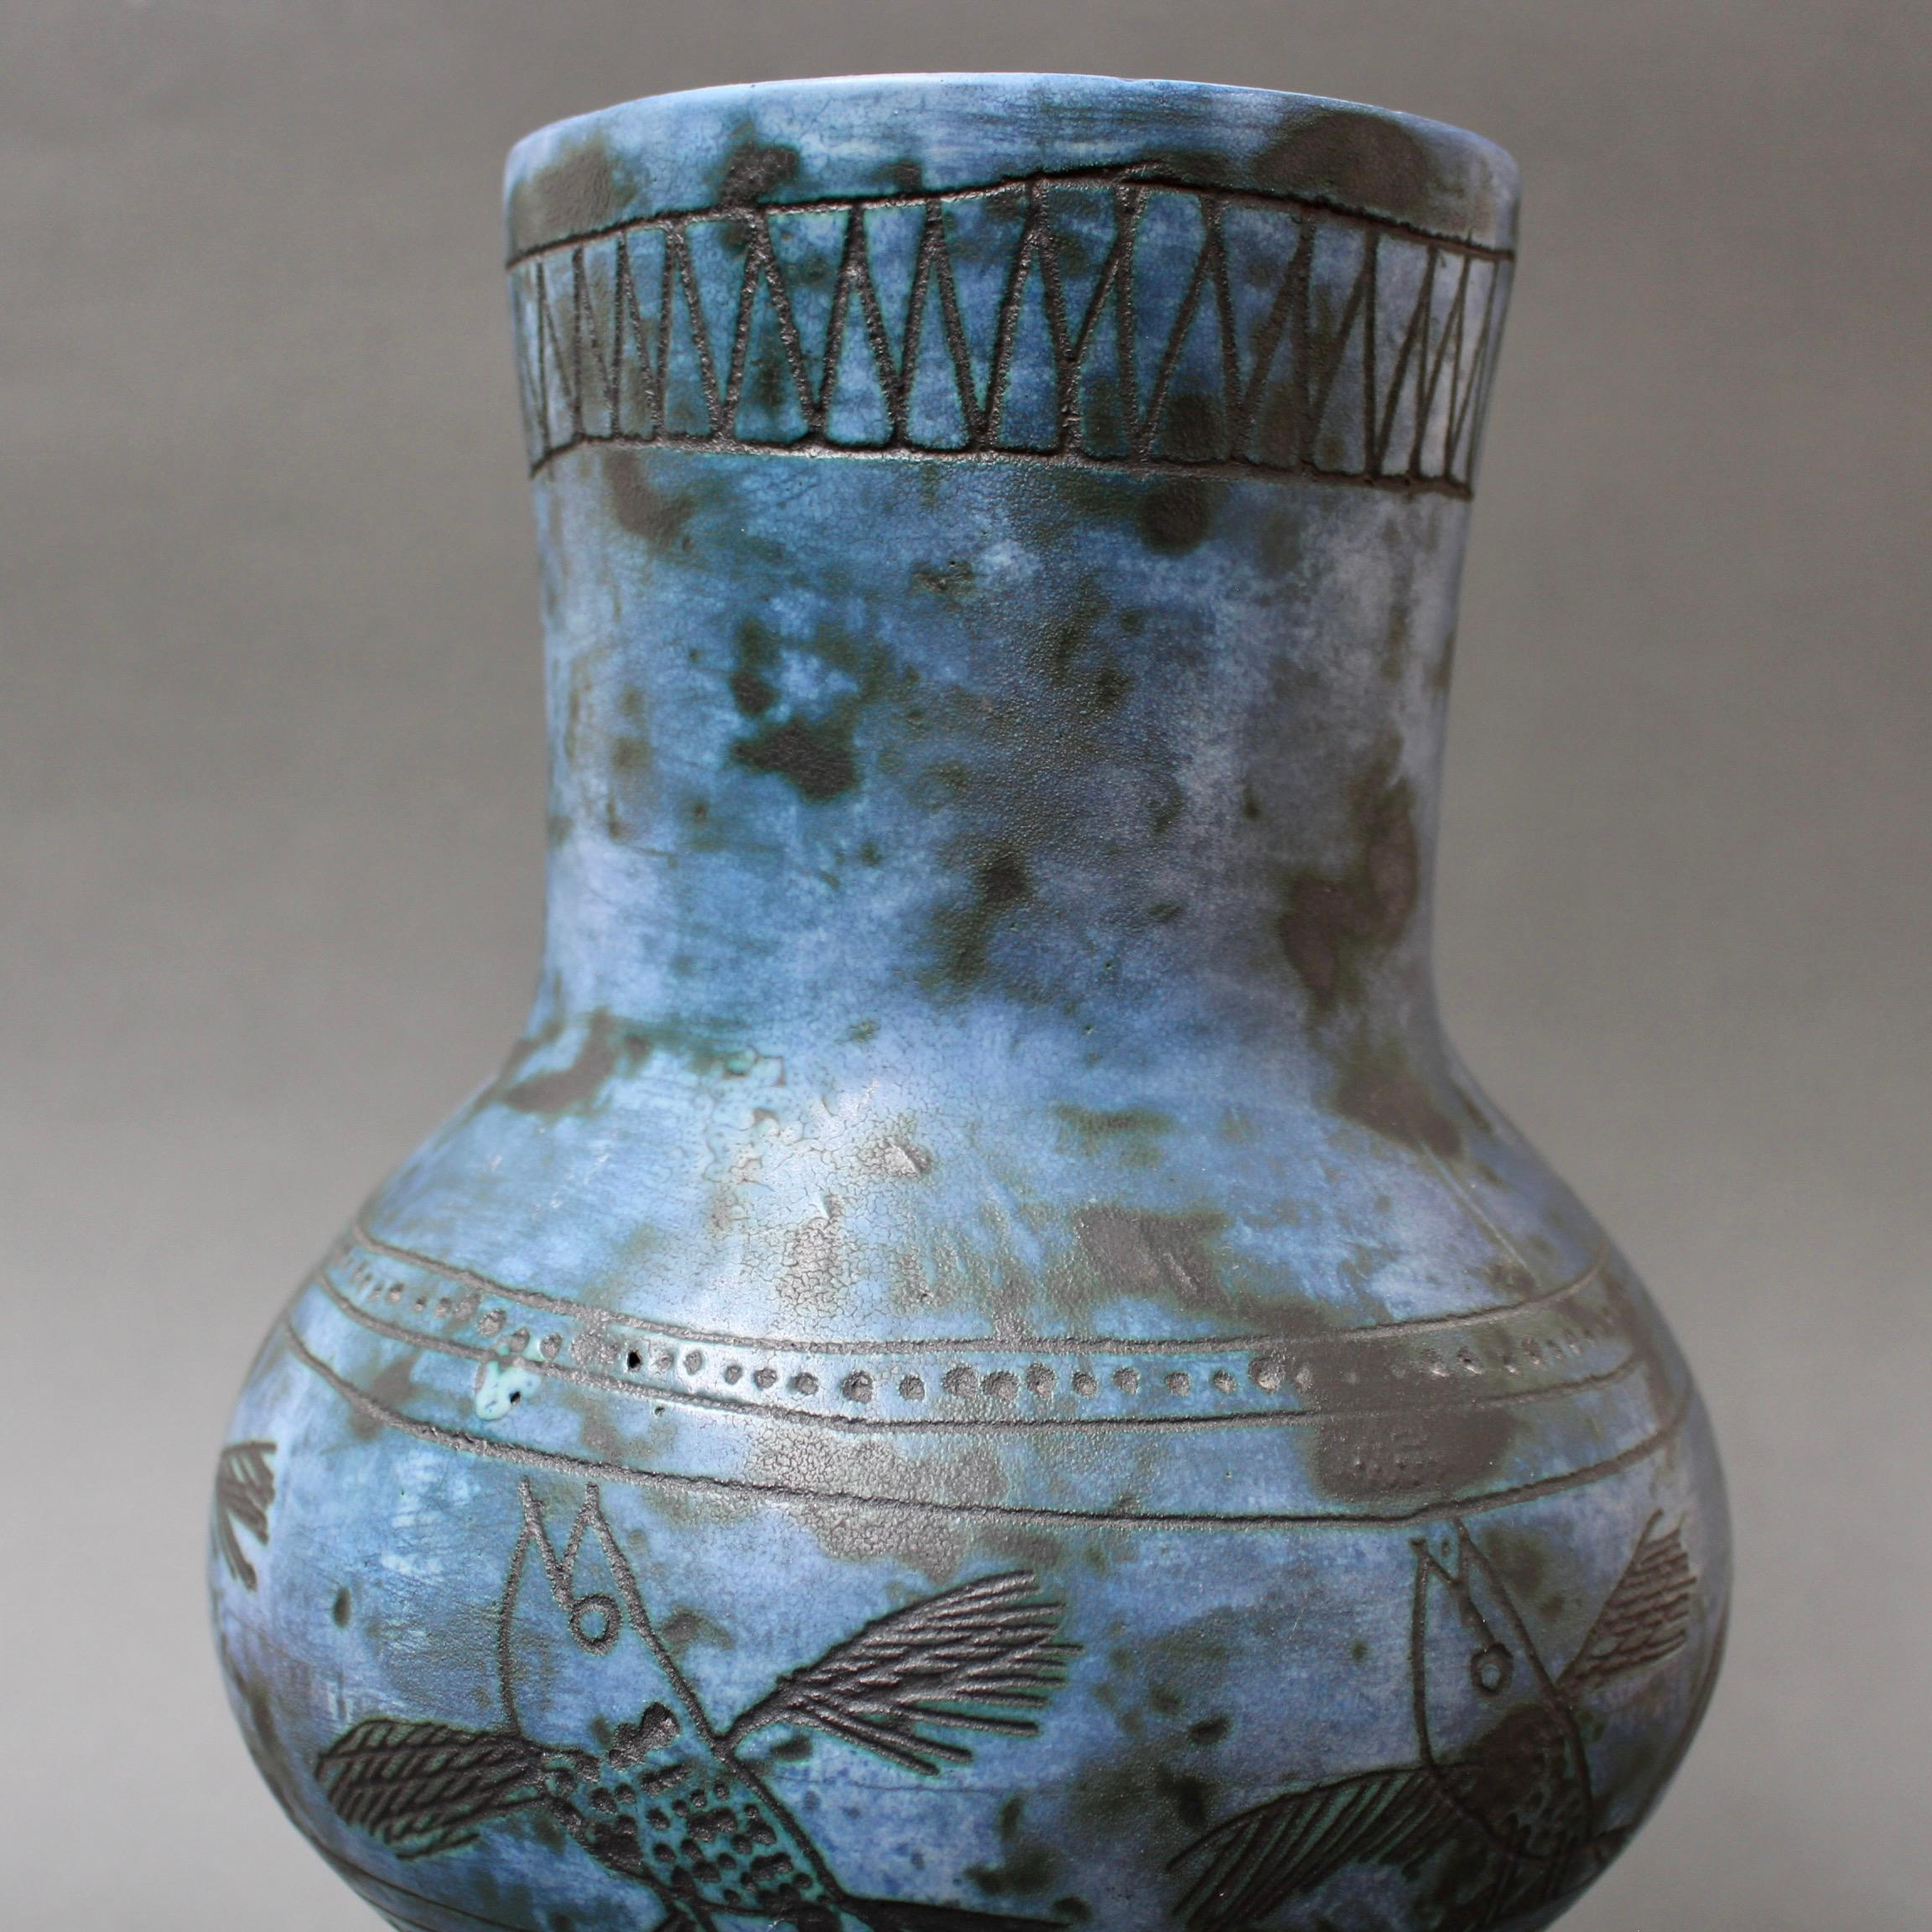 Vintage French Ceramic Vase by Jacques Blin, 'circa 1950s' For Sale 12